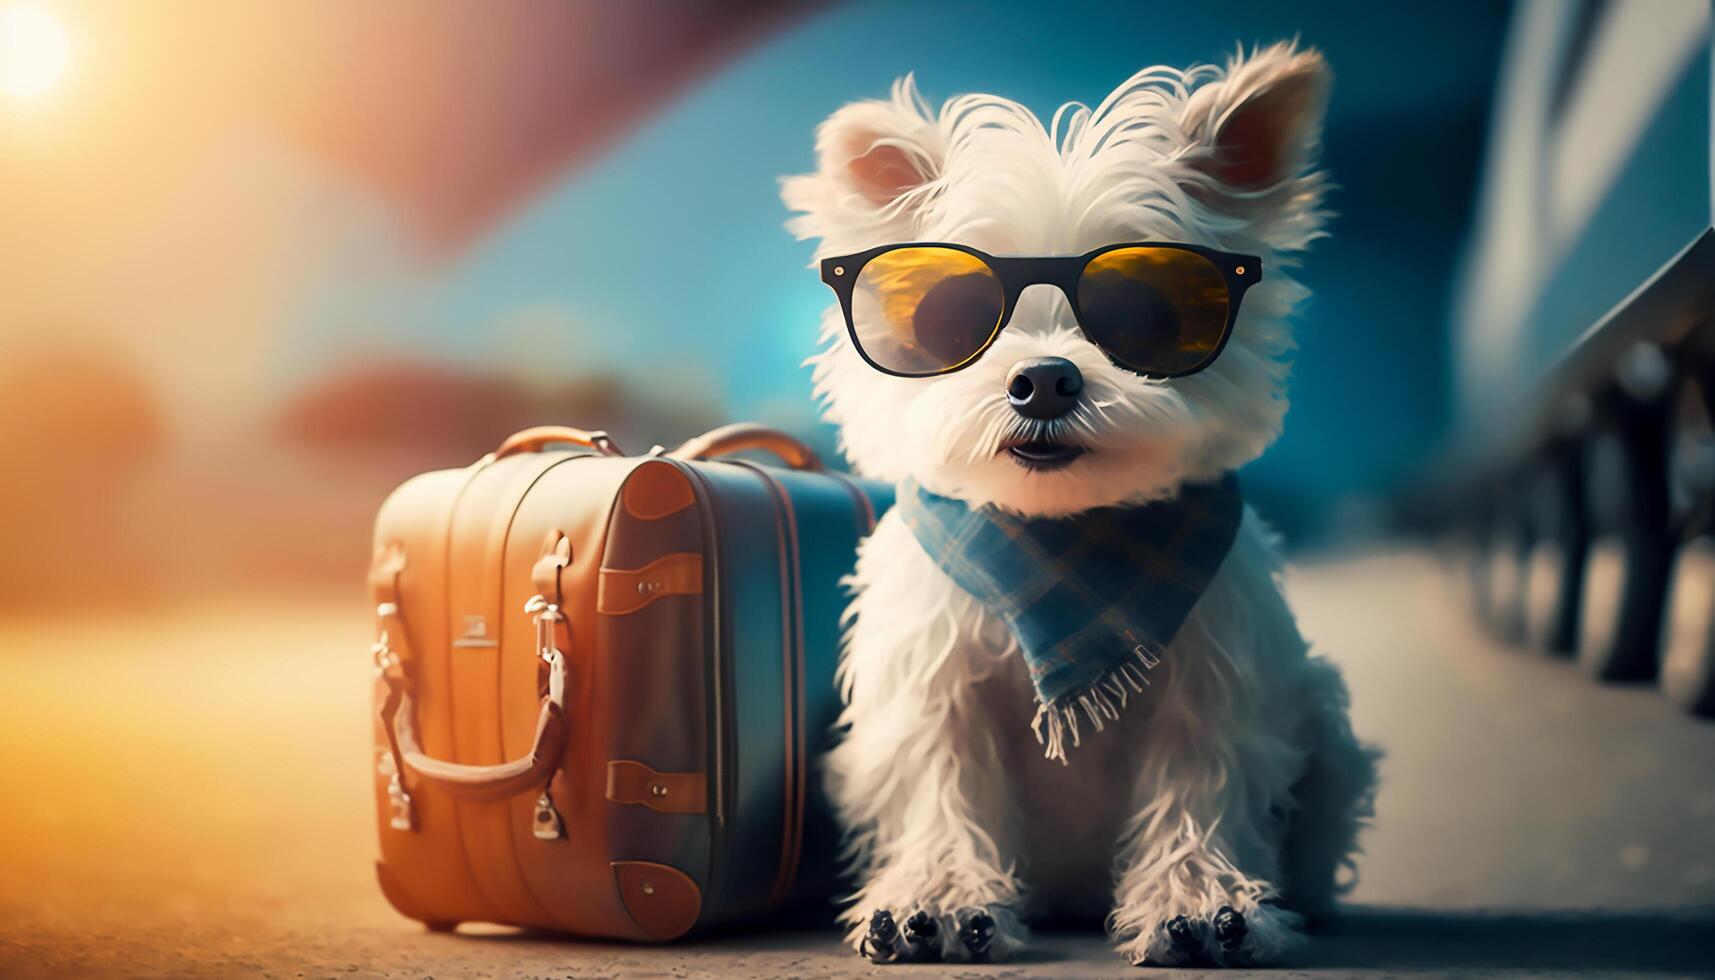 dog wearing sun glasses with luggage to travel, photo